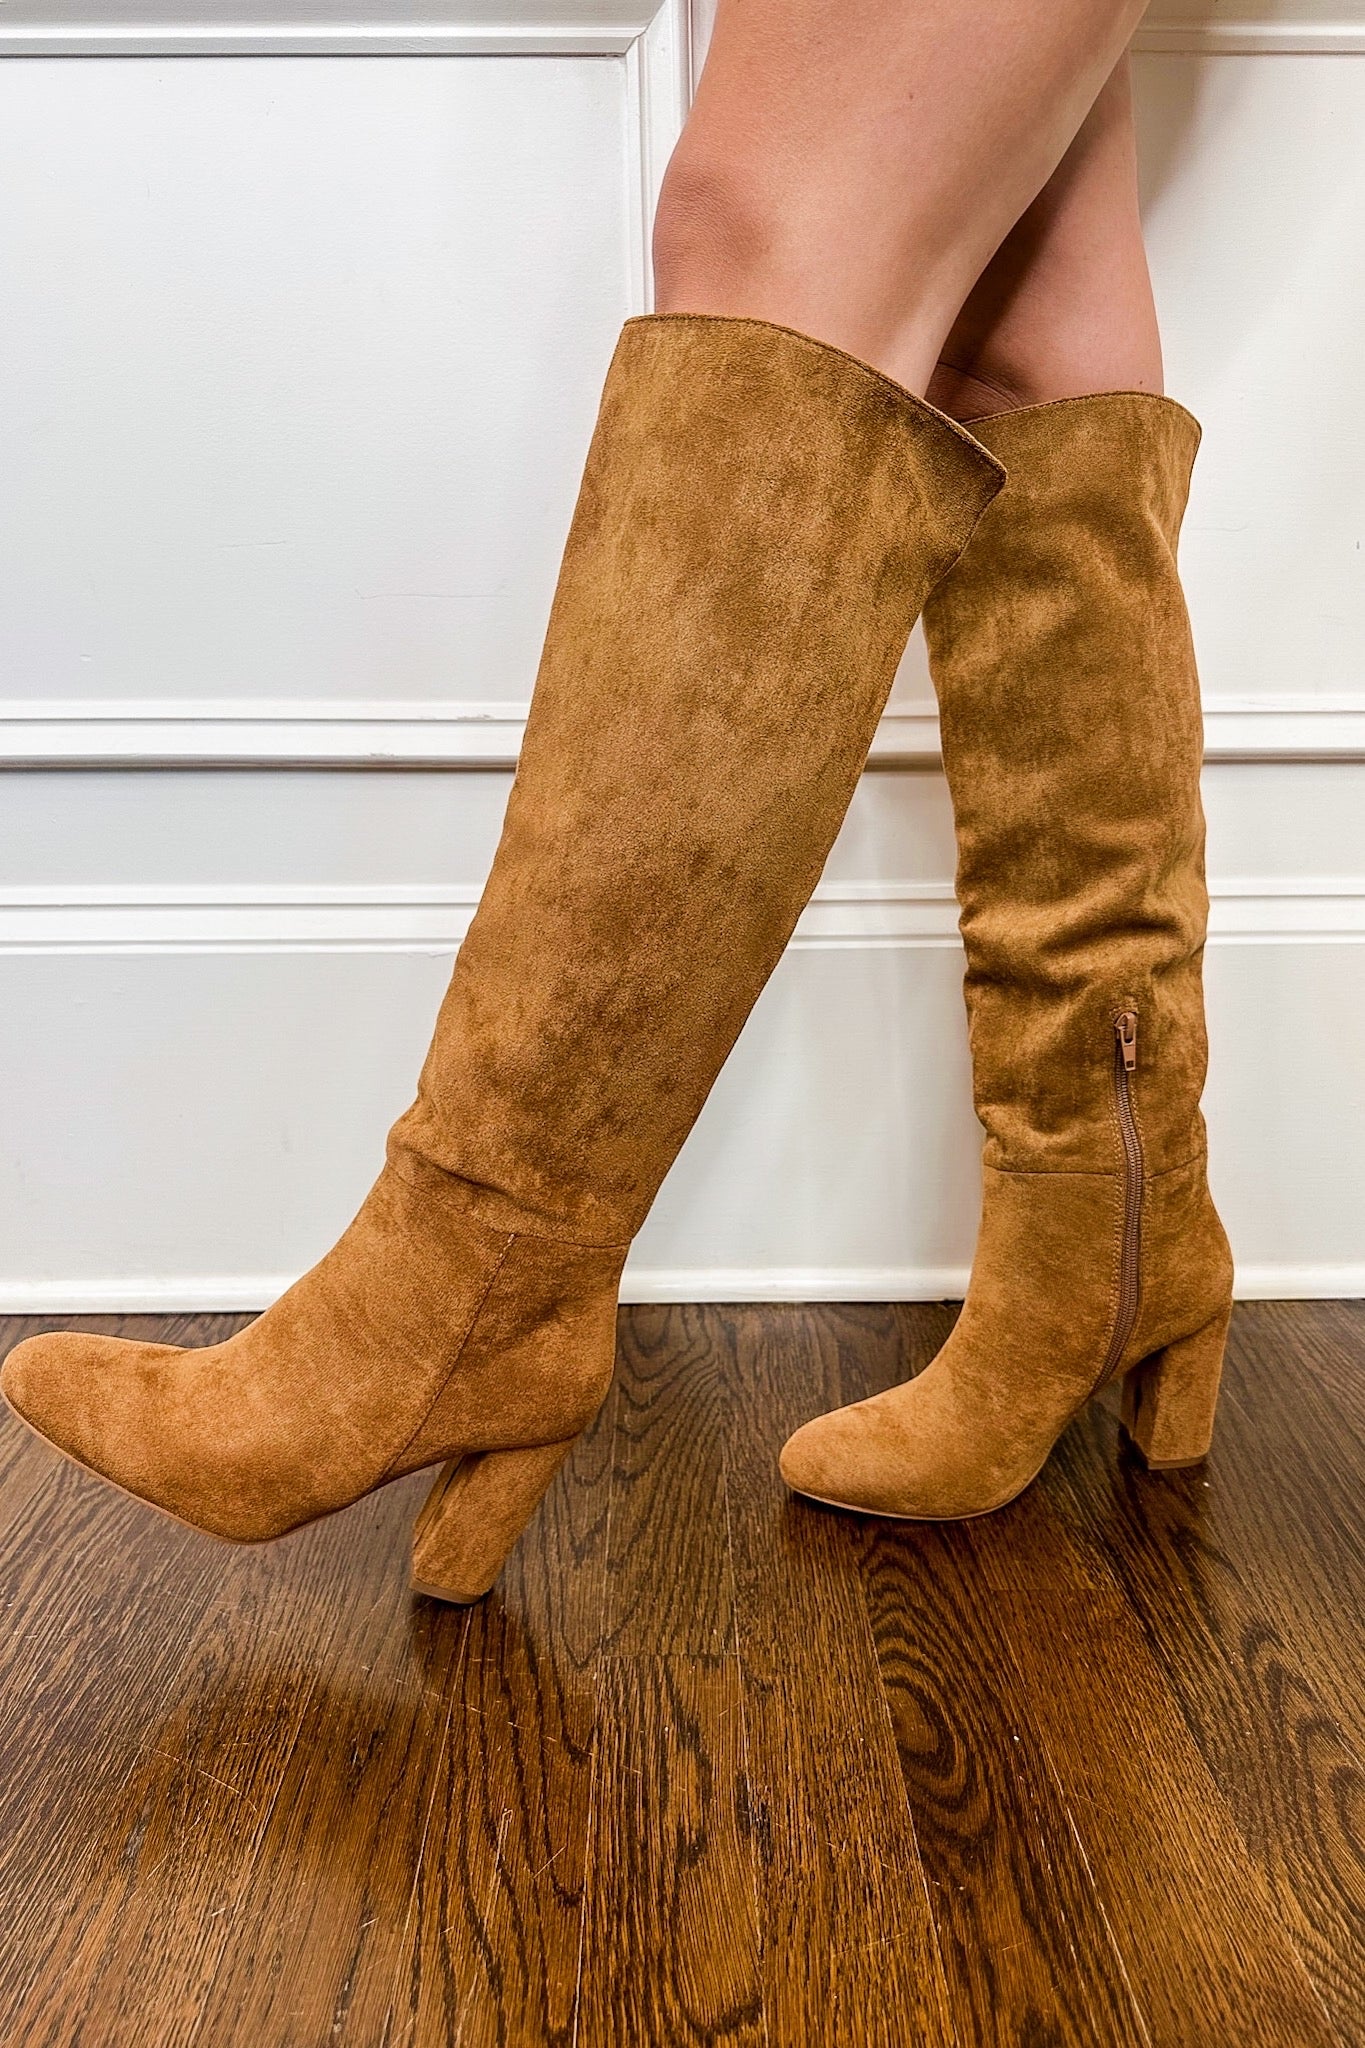 Chic Suede Camel Knee High Boots by Corkys